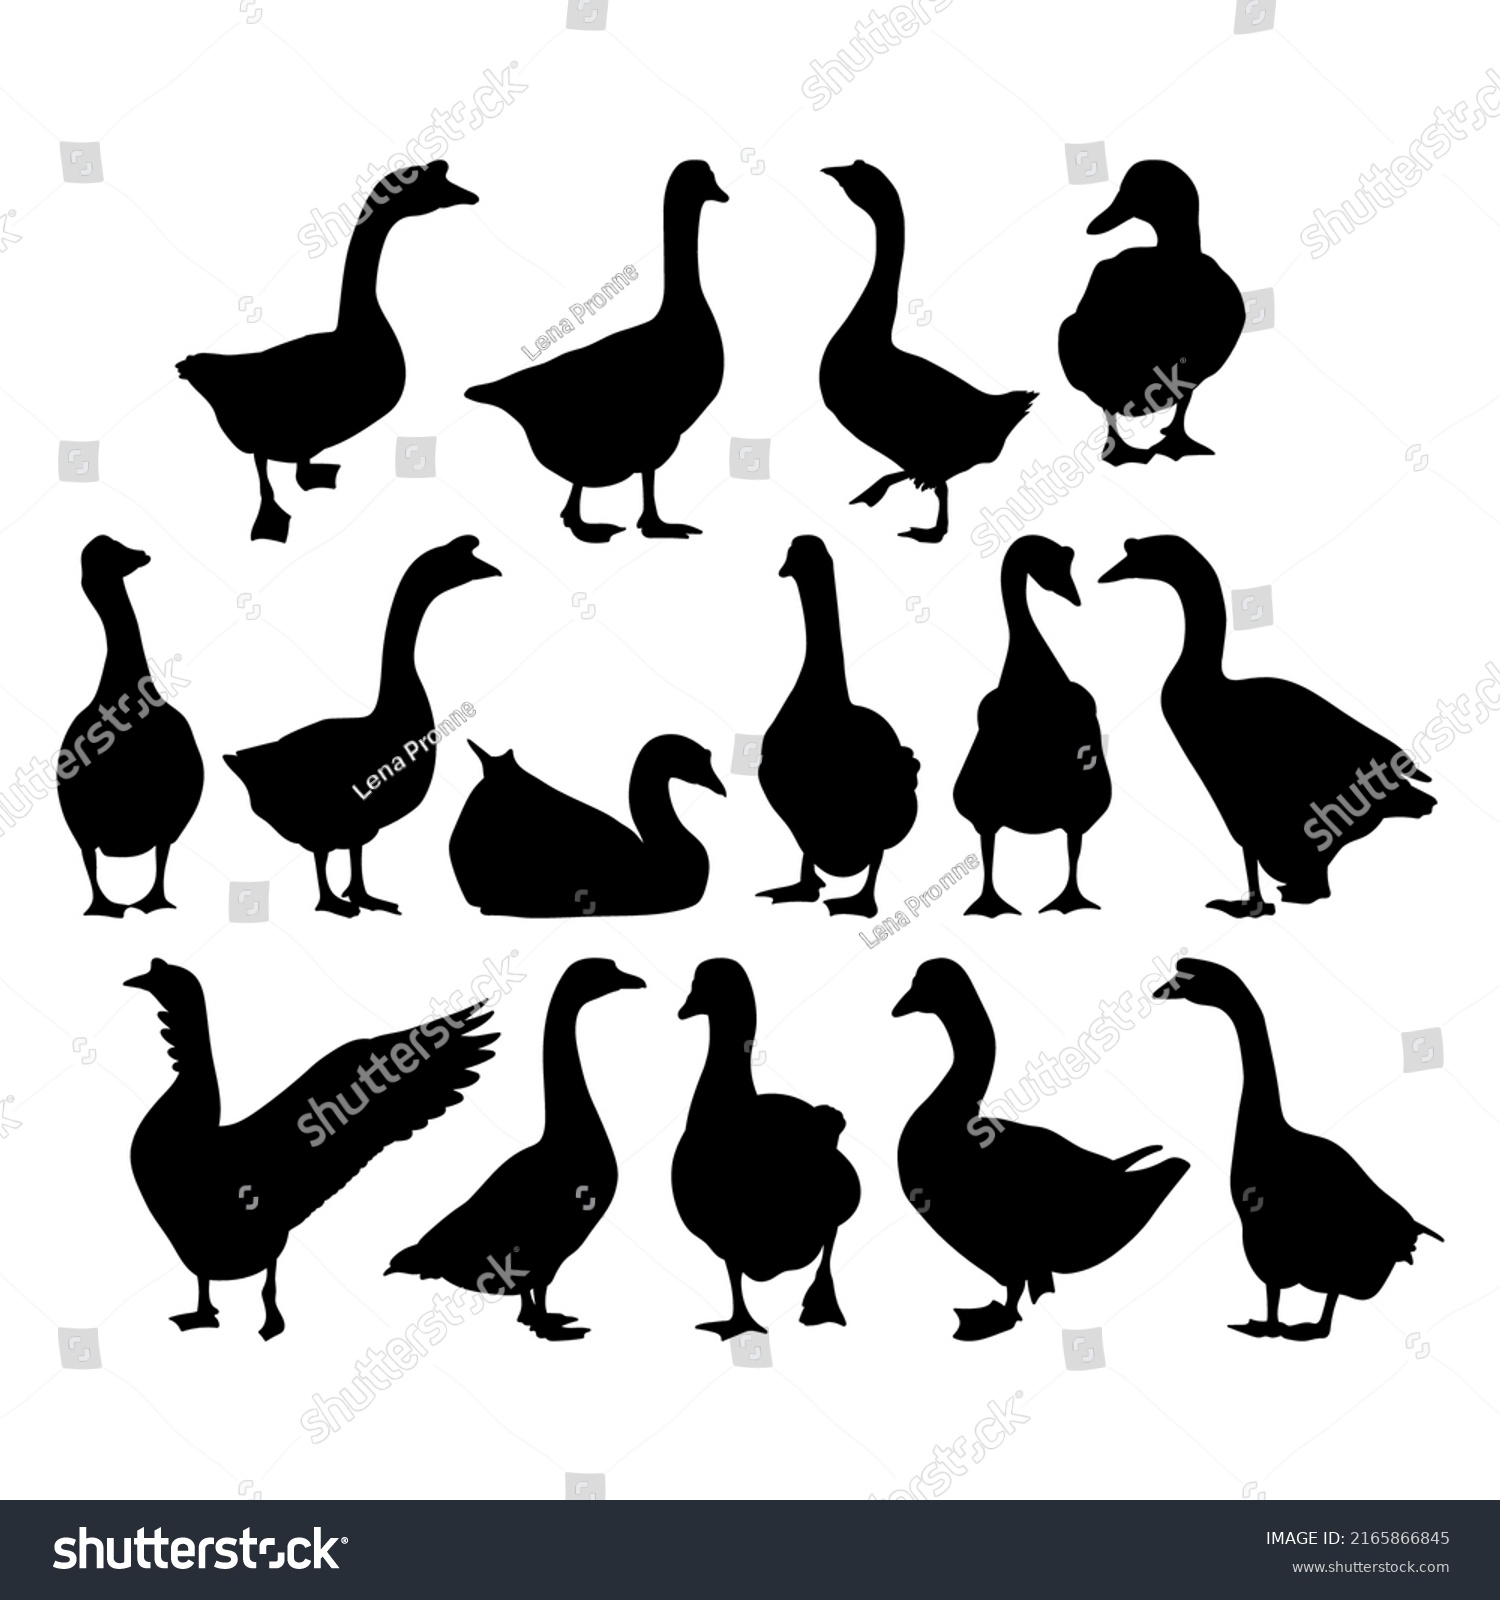 SVG of Goose, geese. Template for plotter lazer cutting of paper, wood svg